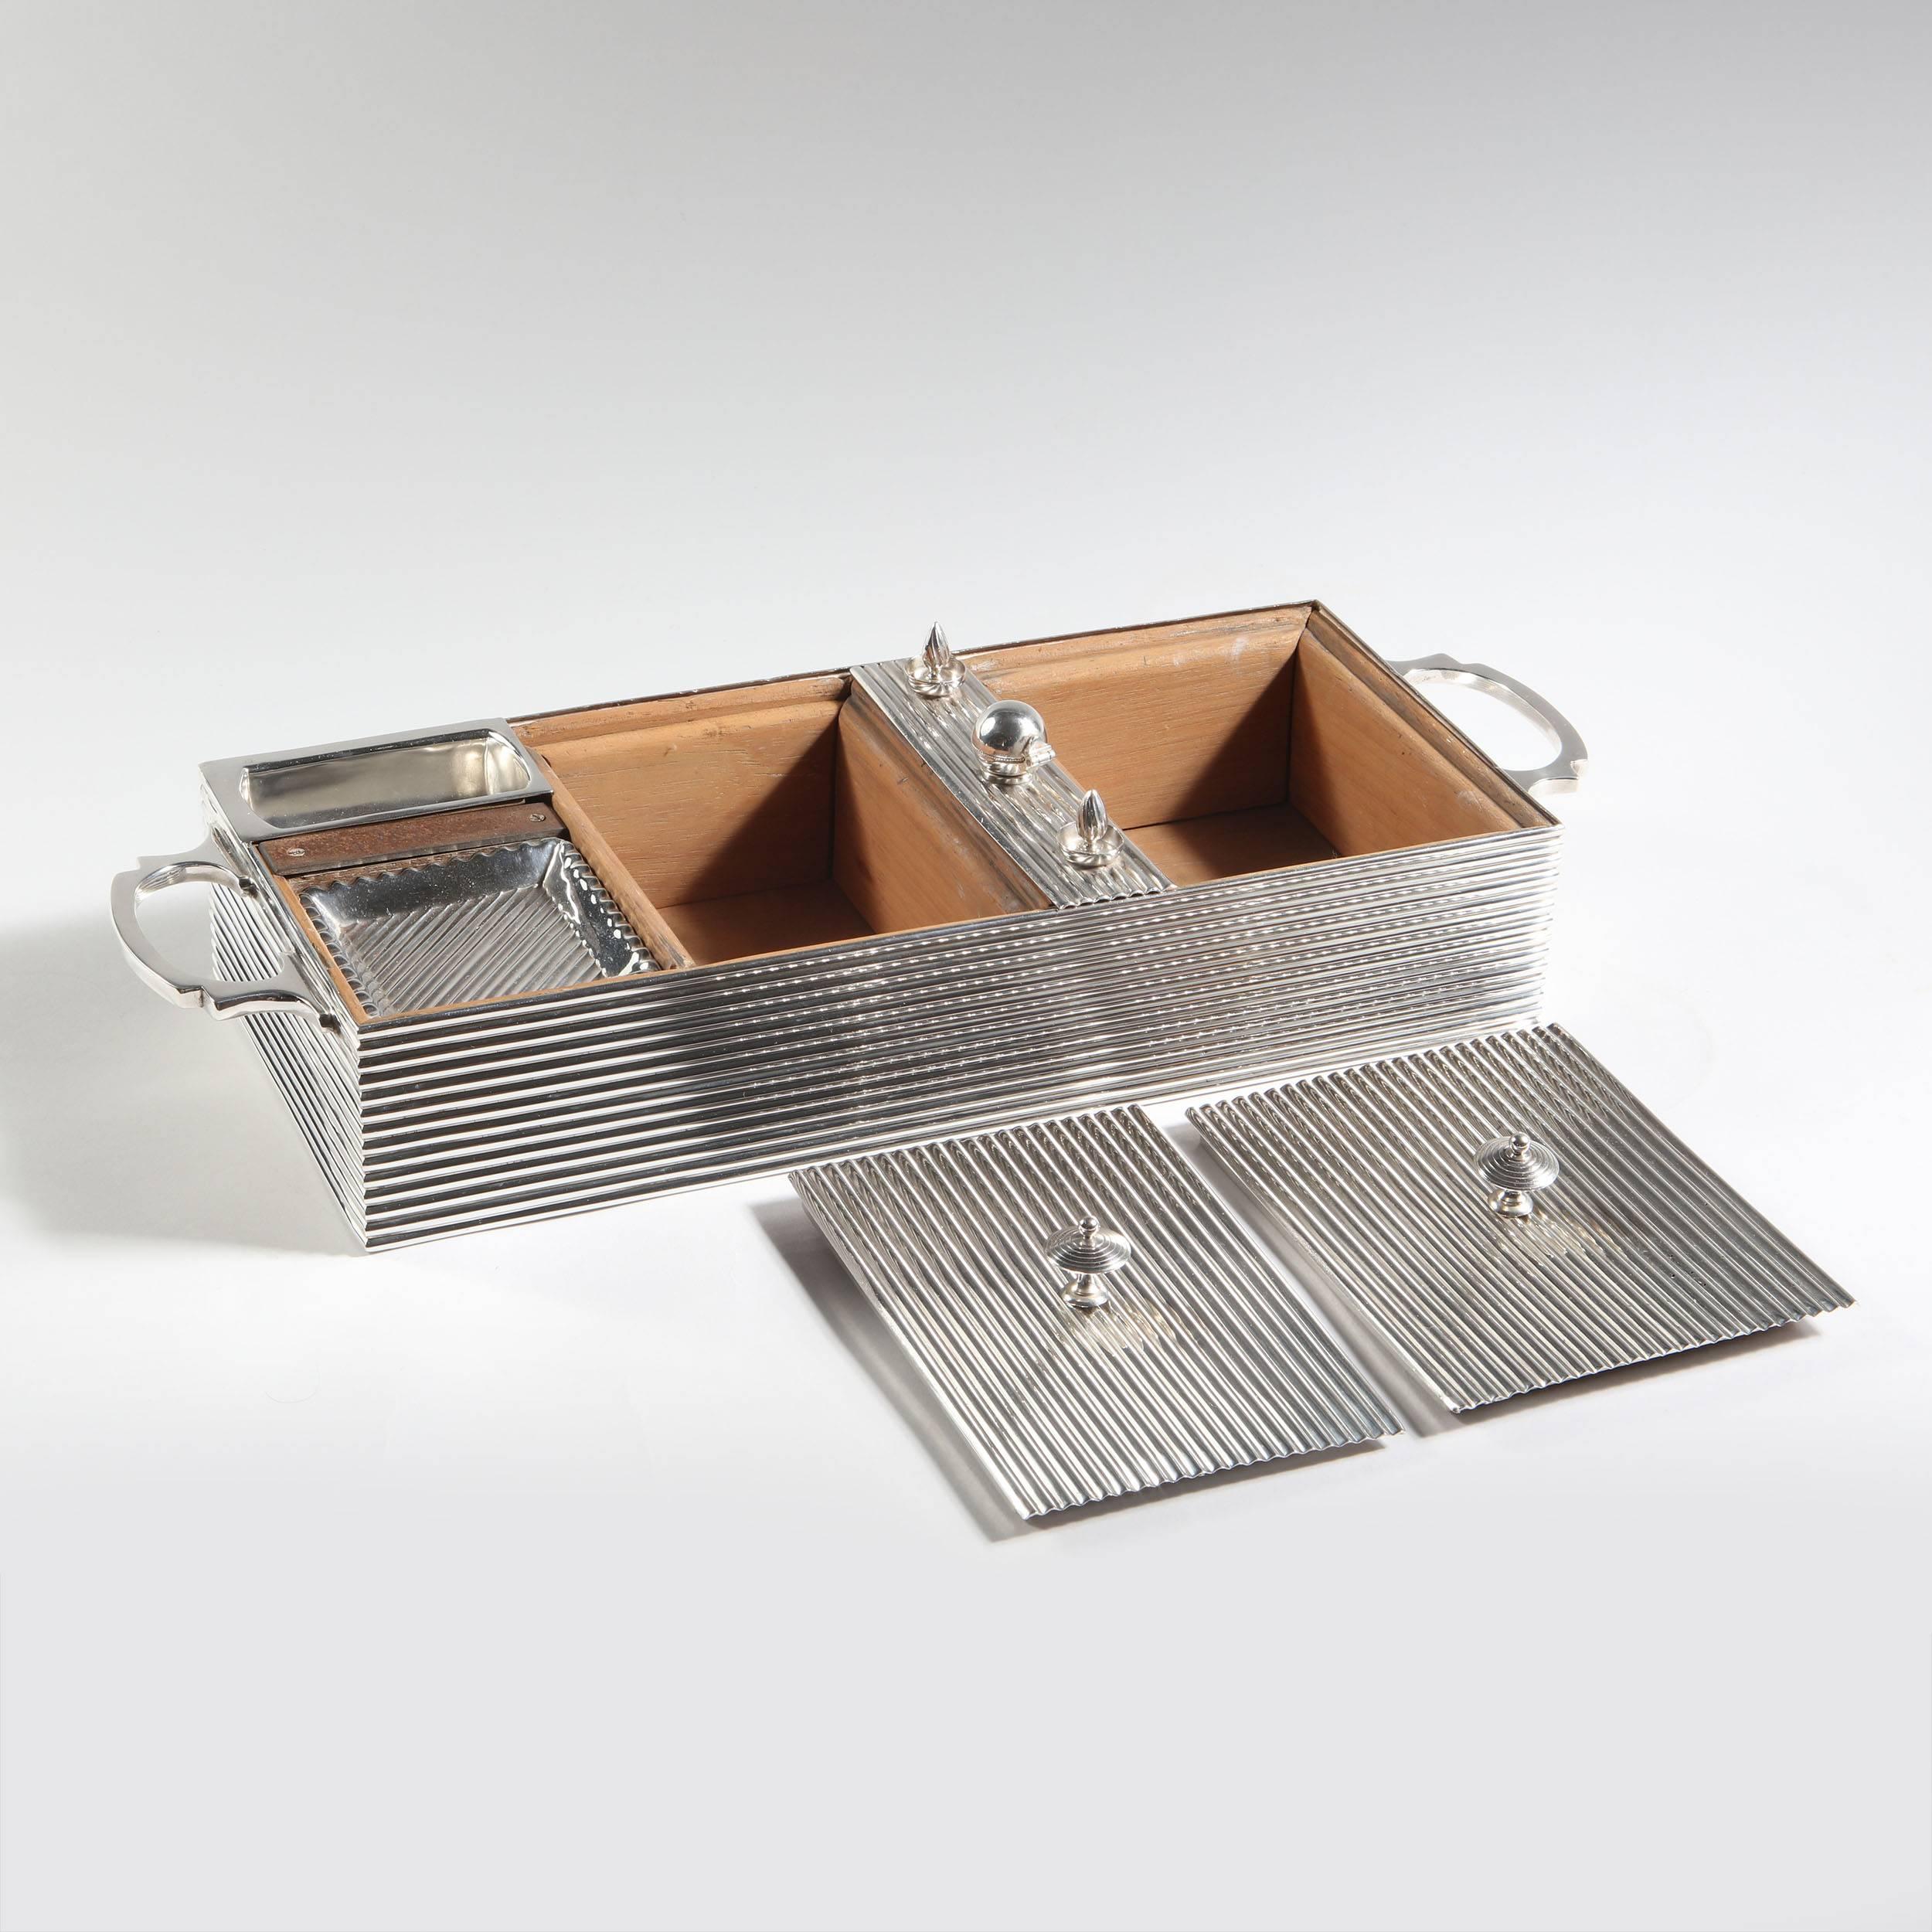 An unusual and inventive vintage silver box made to house cigars, ashtrays, a petrol lighter, two silver wicks and matches, each in their own separate compartment. The exterior in reeded silver plate with two handles, the two lidded cigar